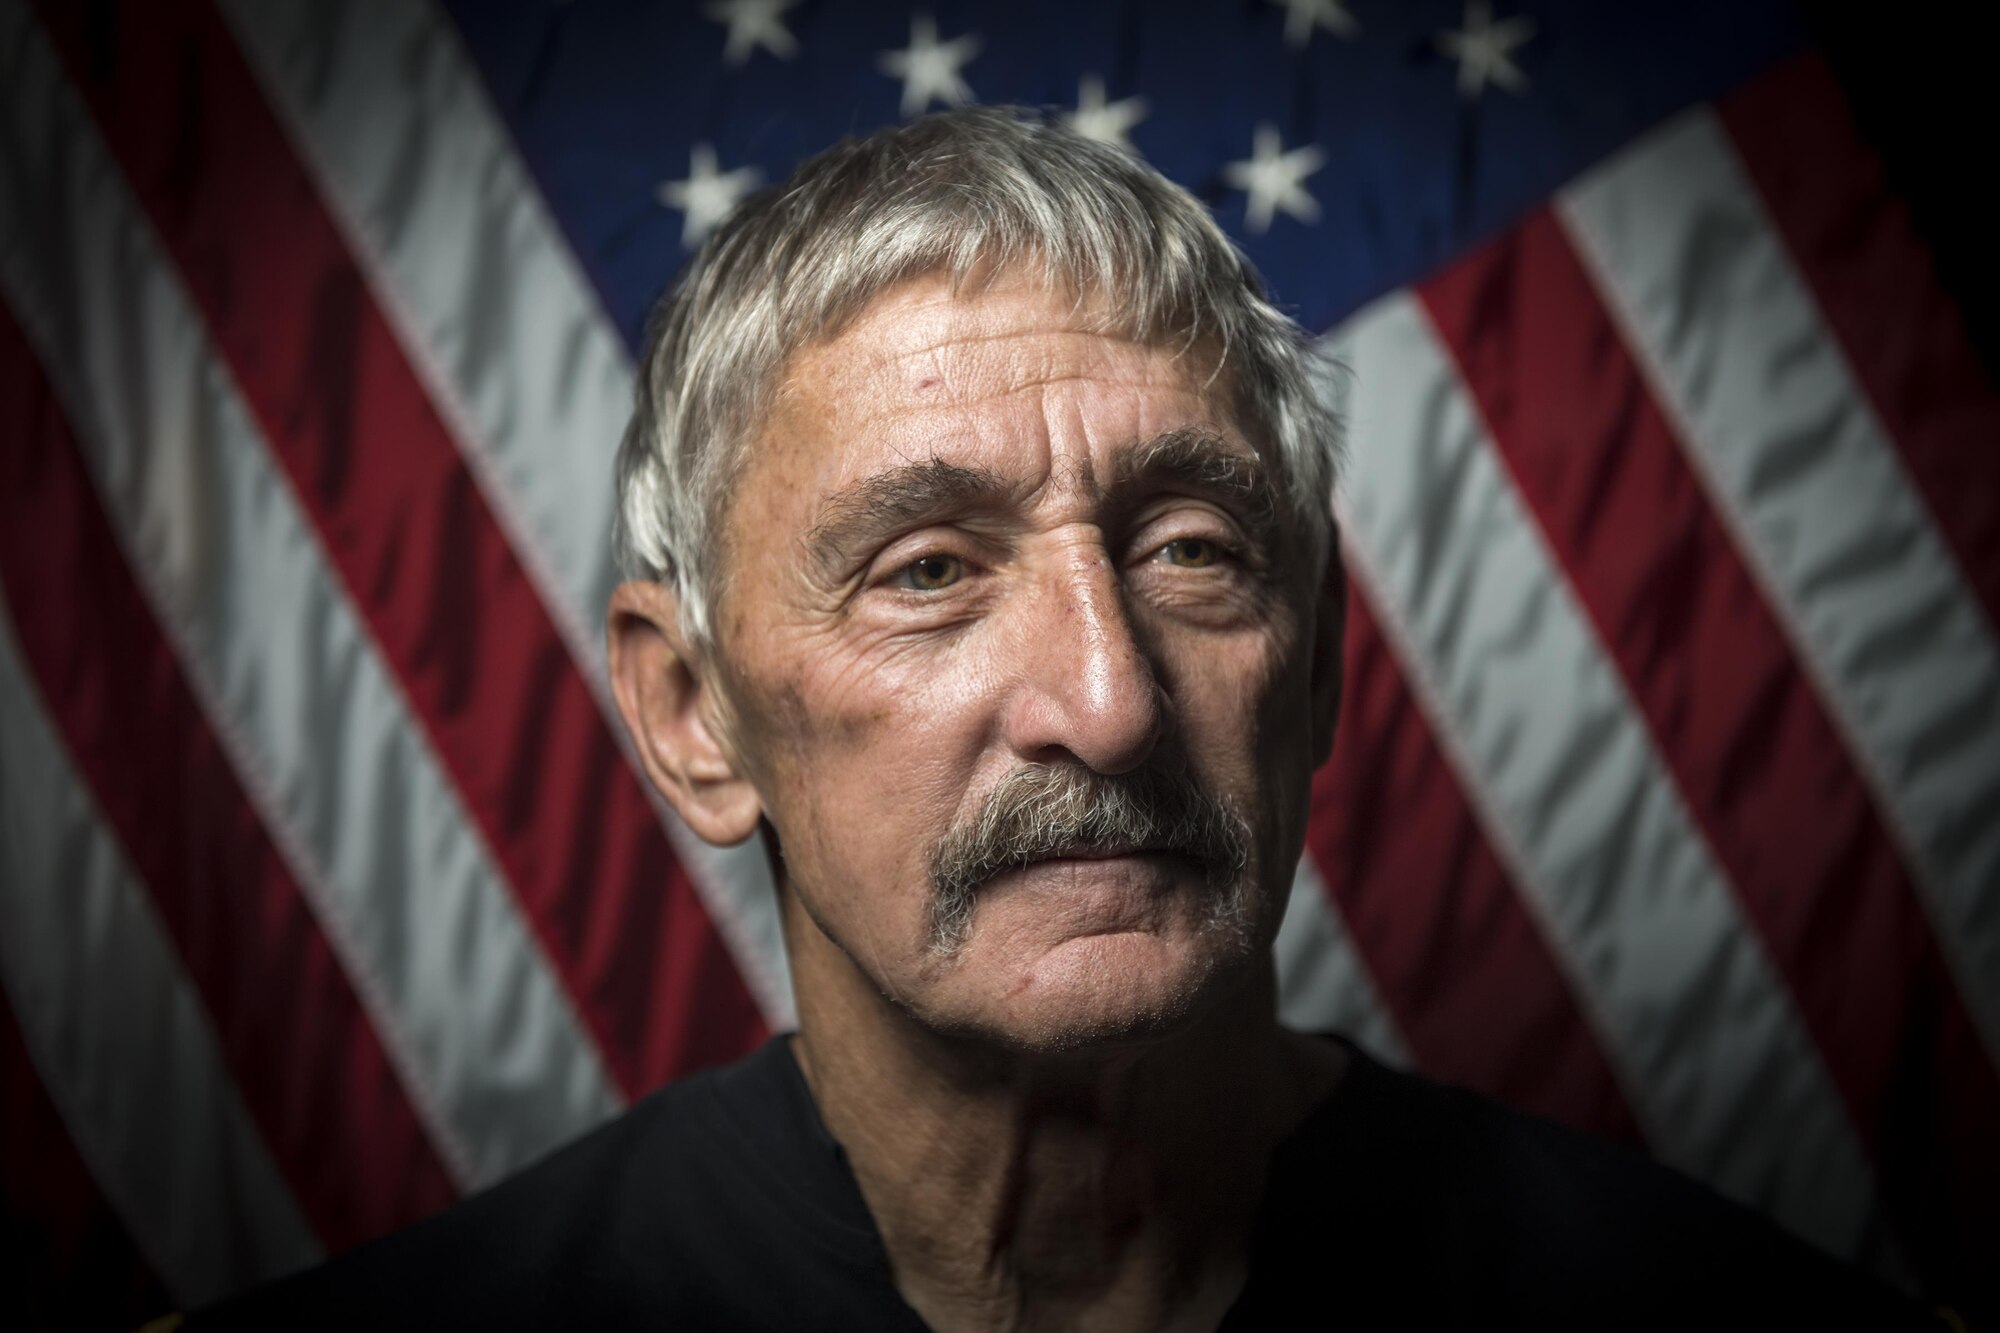 Master Sgt. (Ret.) Paul W. Dunning poses for a photo, May 9, 2017, at Moody Air Force Base, Ga. Dunning received his draft notice in October 1968 and had full intentions of joining the U.S. Marine Corps. Upon registration he was persuaded by a recruiter to join the Air Force and began his career as a tactical aircraft maintenance specialist. Dunning retired in 2002 and began crewing aircraft as a civilian which he still does. Over the years, the uniforms and names of the company have changed, but the job Dunning does has remained the same. He’s been crewing aircraft for 33 years and still loves it.